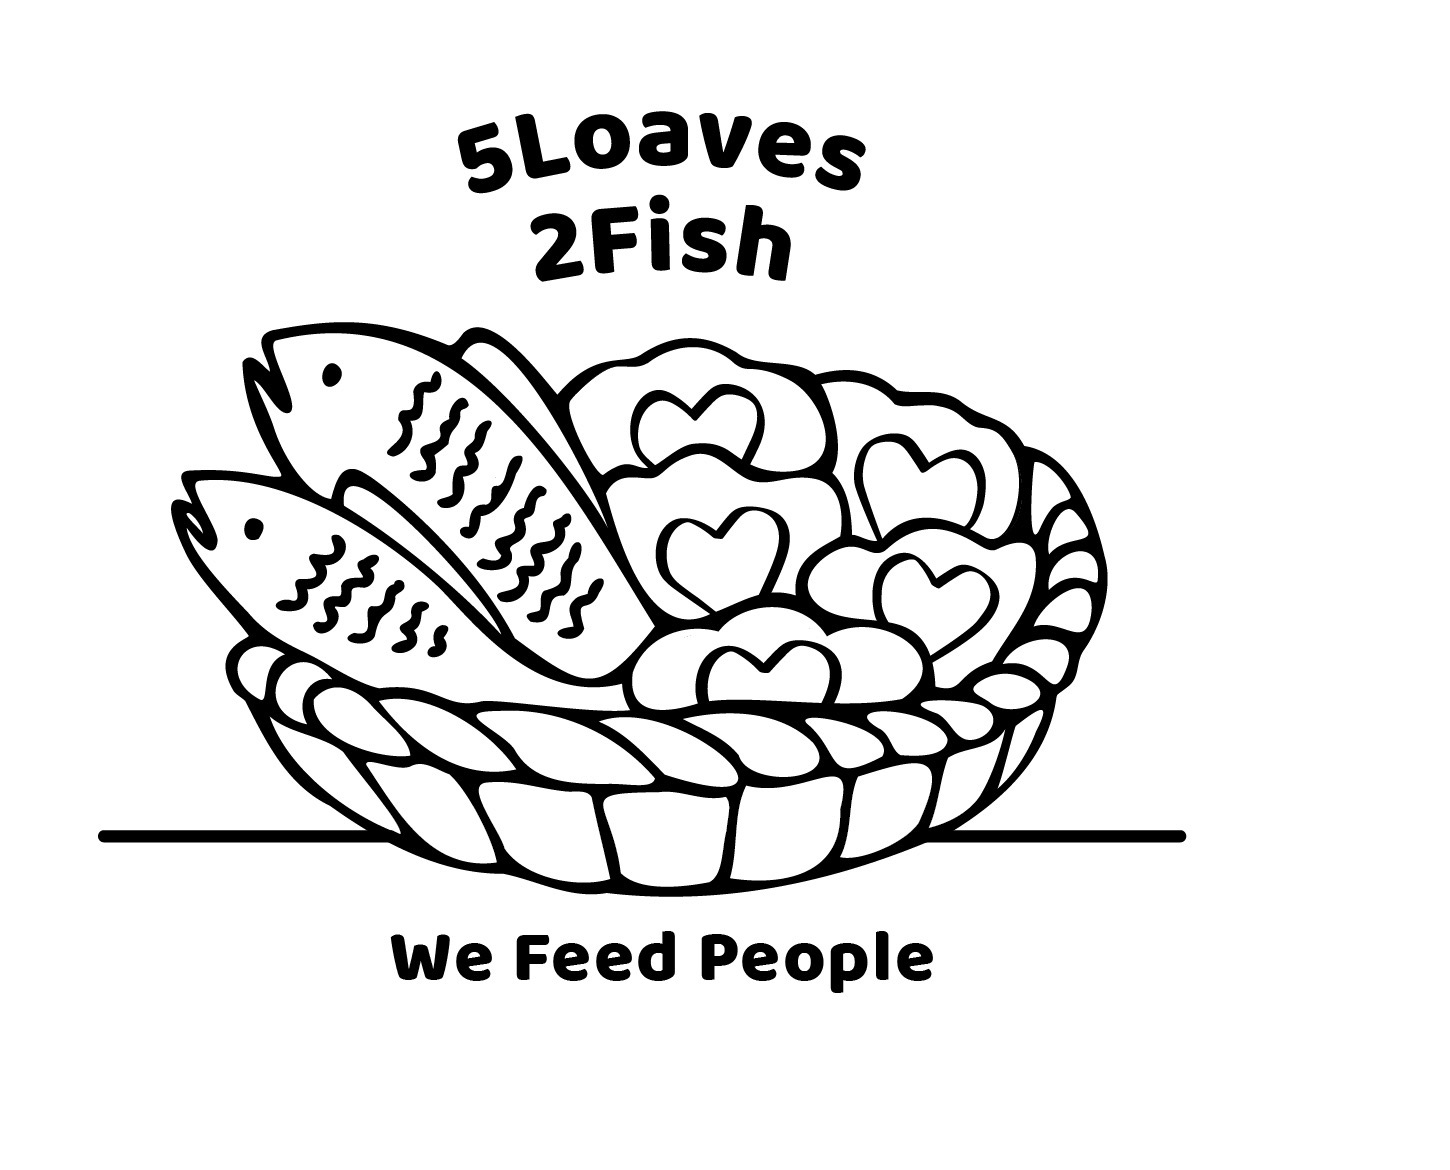 5Loaves2Fish is hiring for a Dishwasher